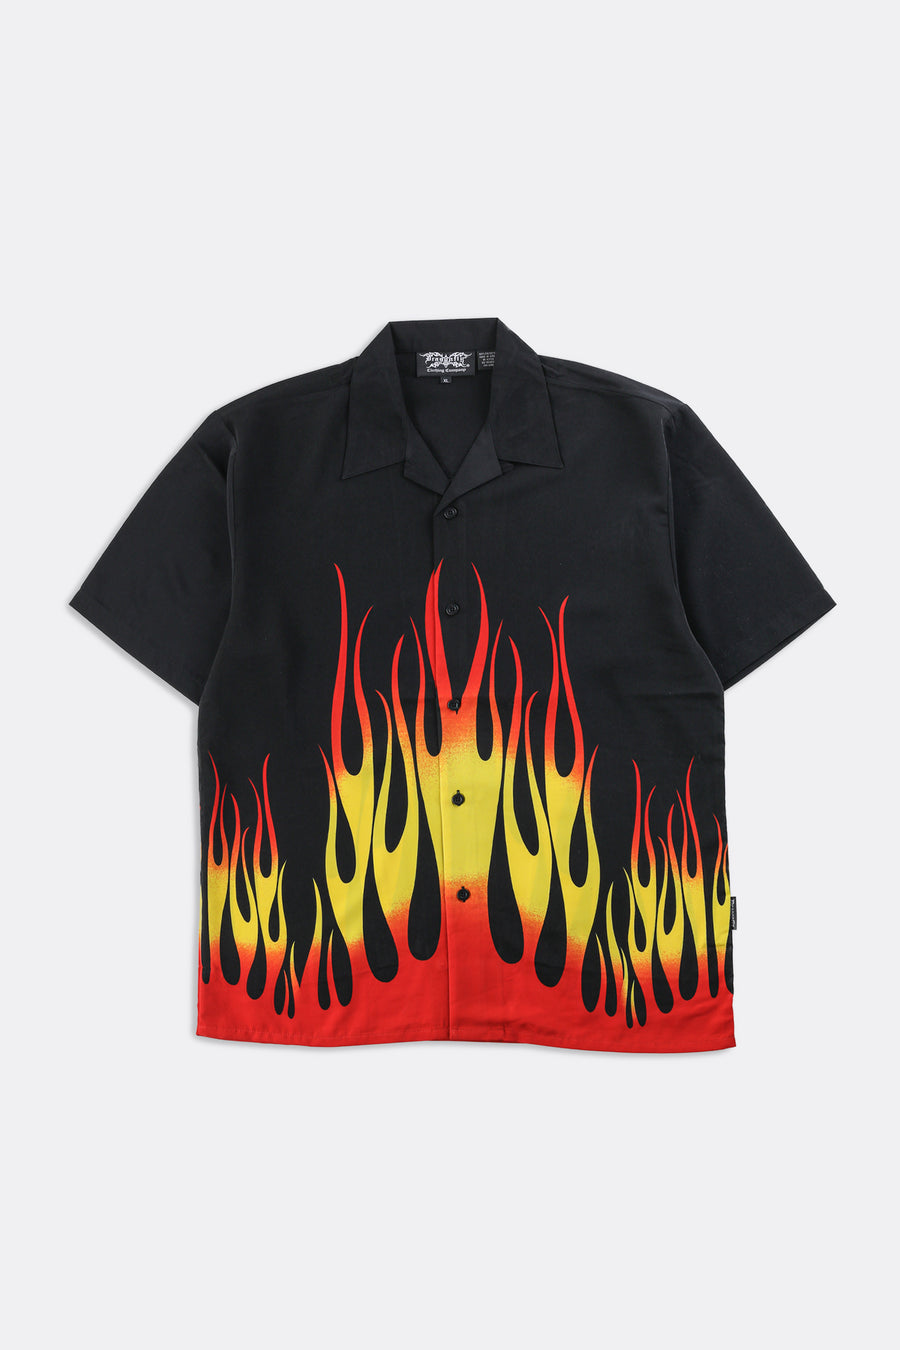 Deadstock Dragonfly Flames Camp Shirt - L, XXL